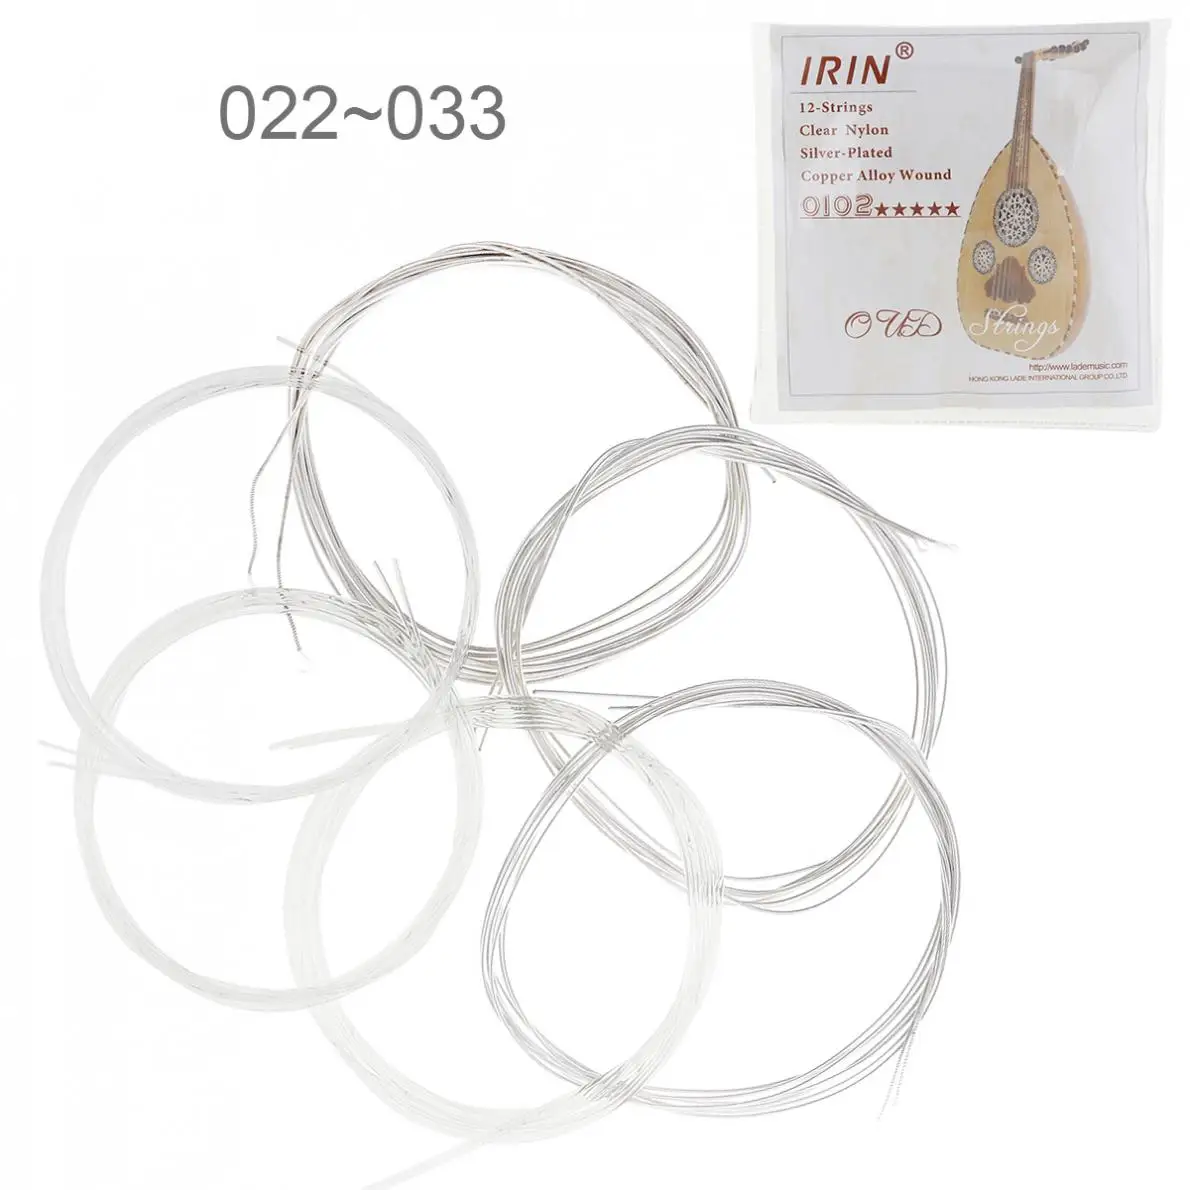 

Guitar Strings 6pcs/lot Oud String 022-033 Inch Clear Nylon Silver-Plated Copper Alloy with Full Bright Tone